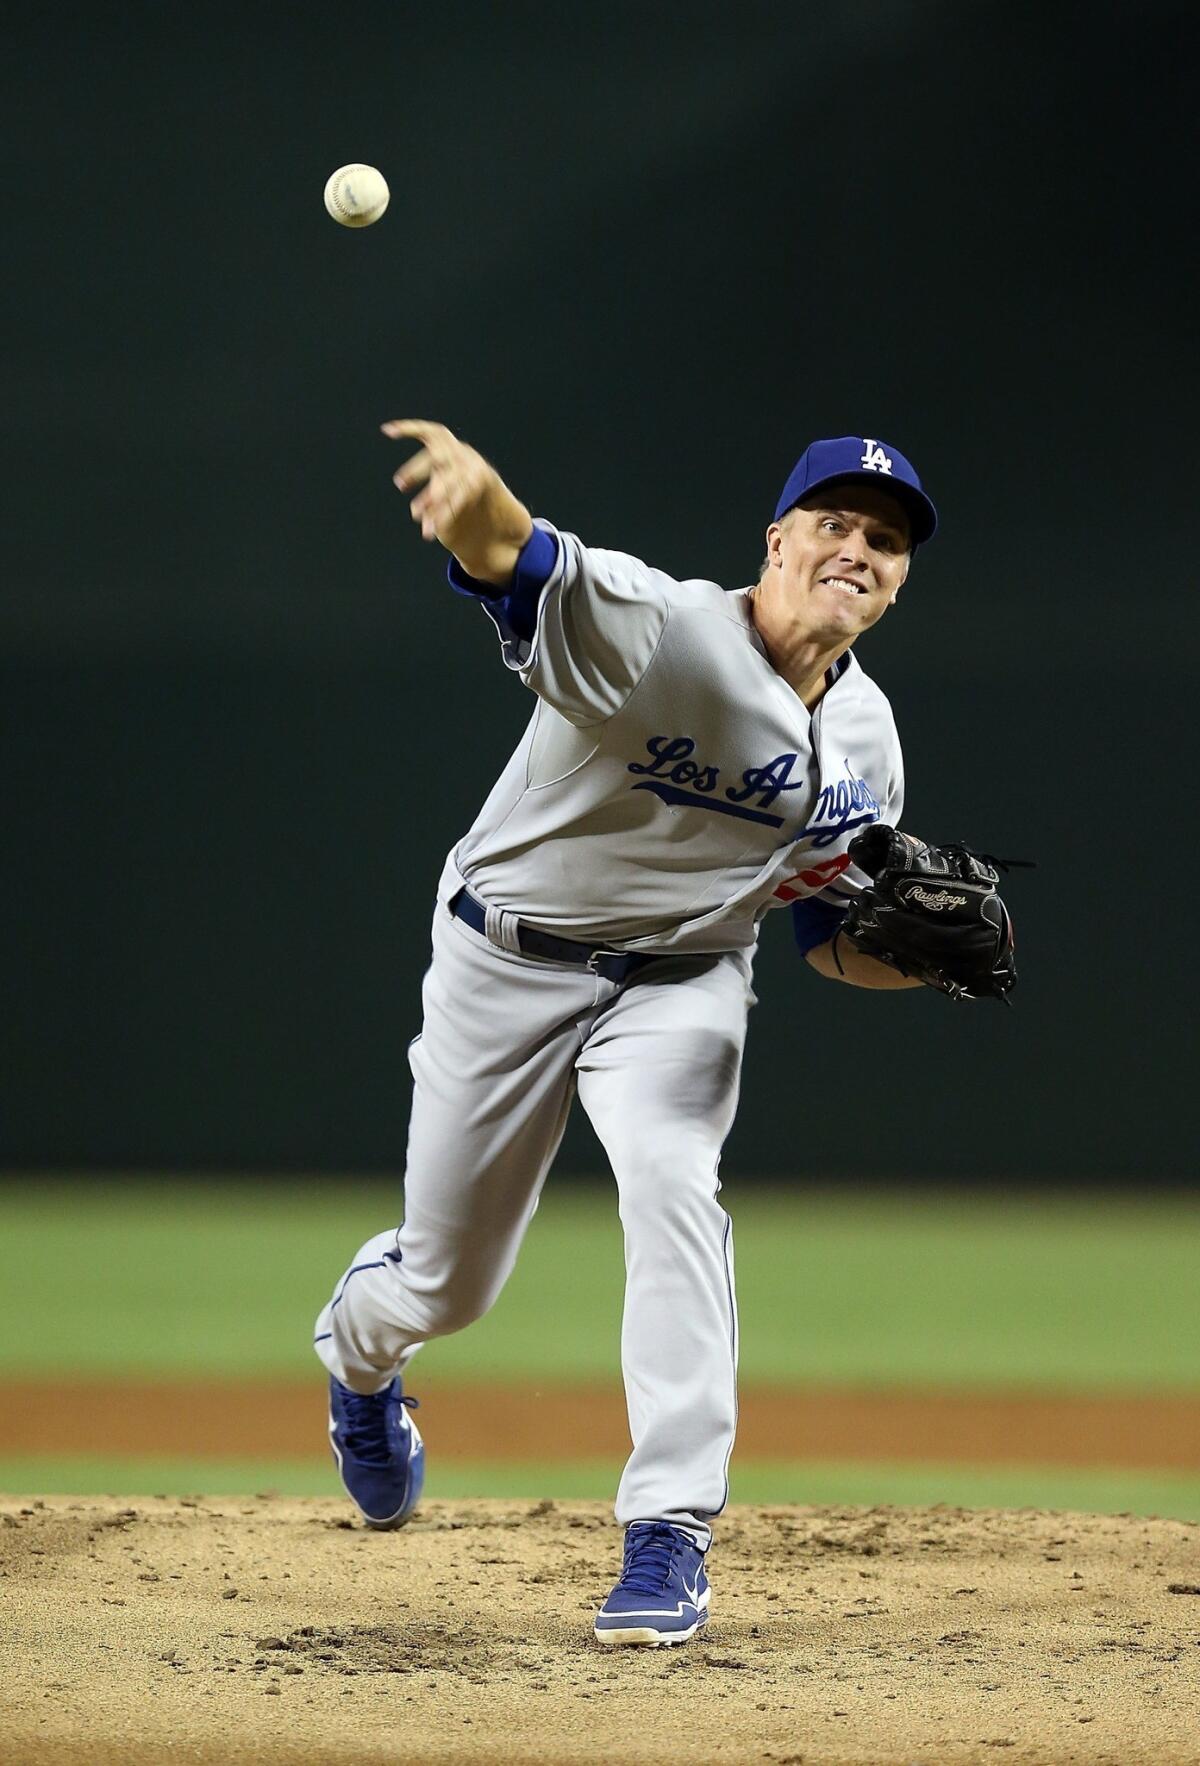 Dodgers starter Zack Greinke delivers a pitch during the team's 6-1 victory over the Arizona Diamondbacks on Monday.